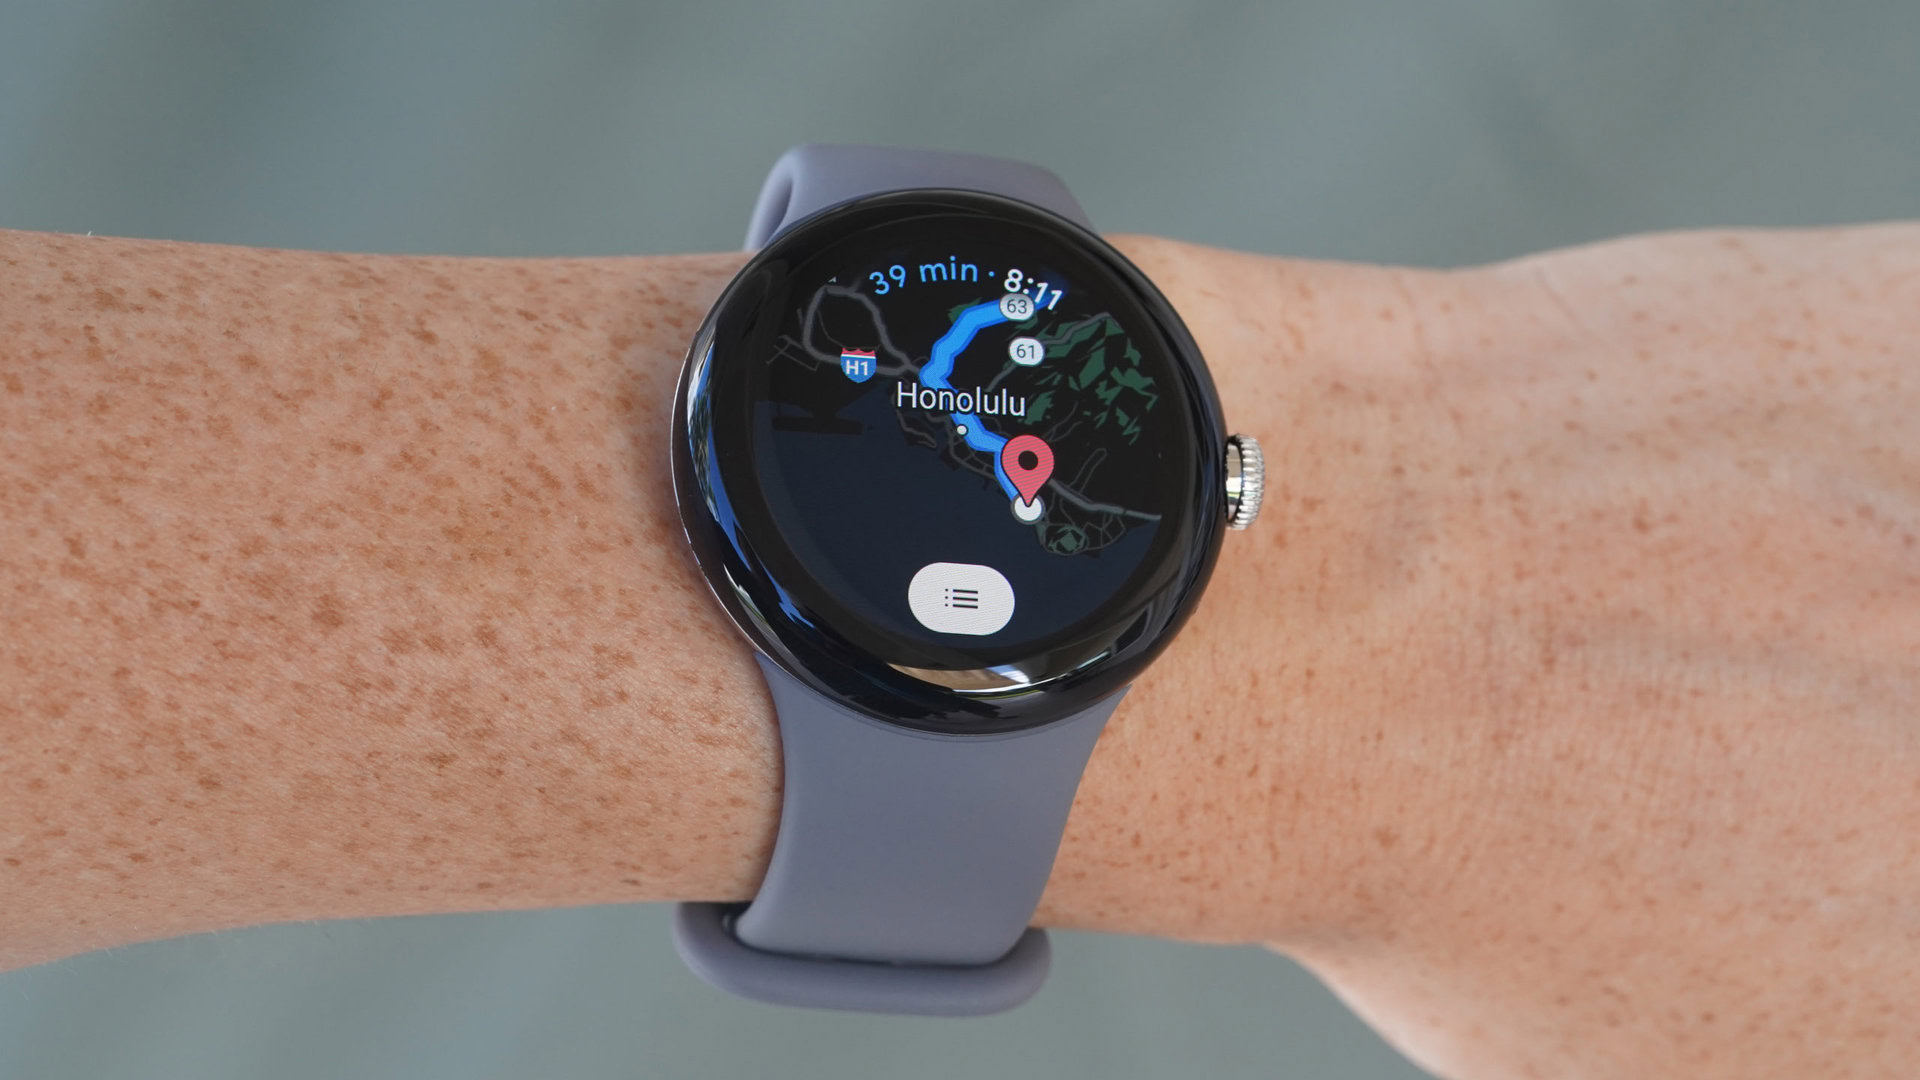 Google Pixel Watch buyer's guide: Price, features, and more